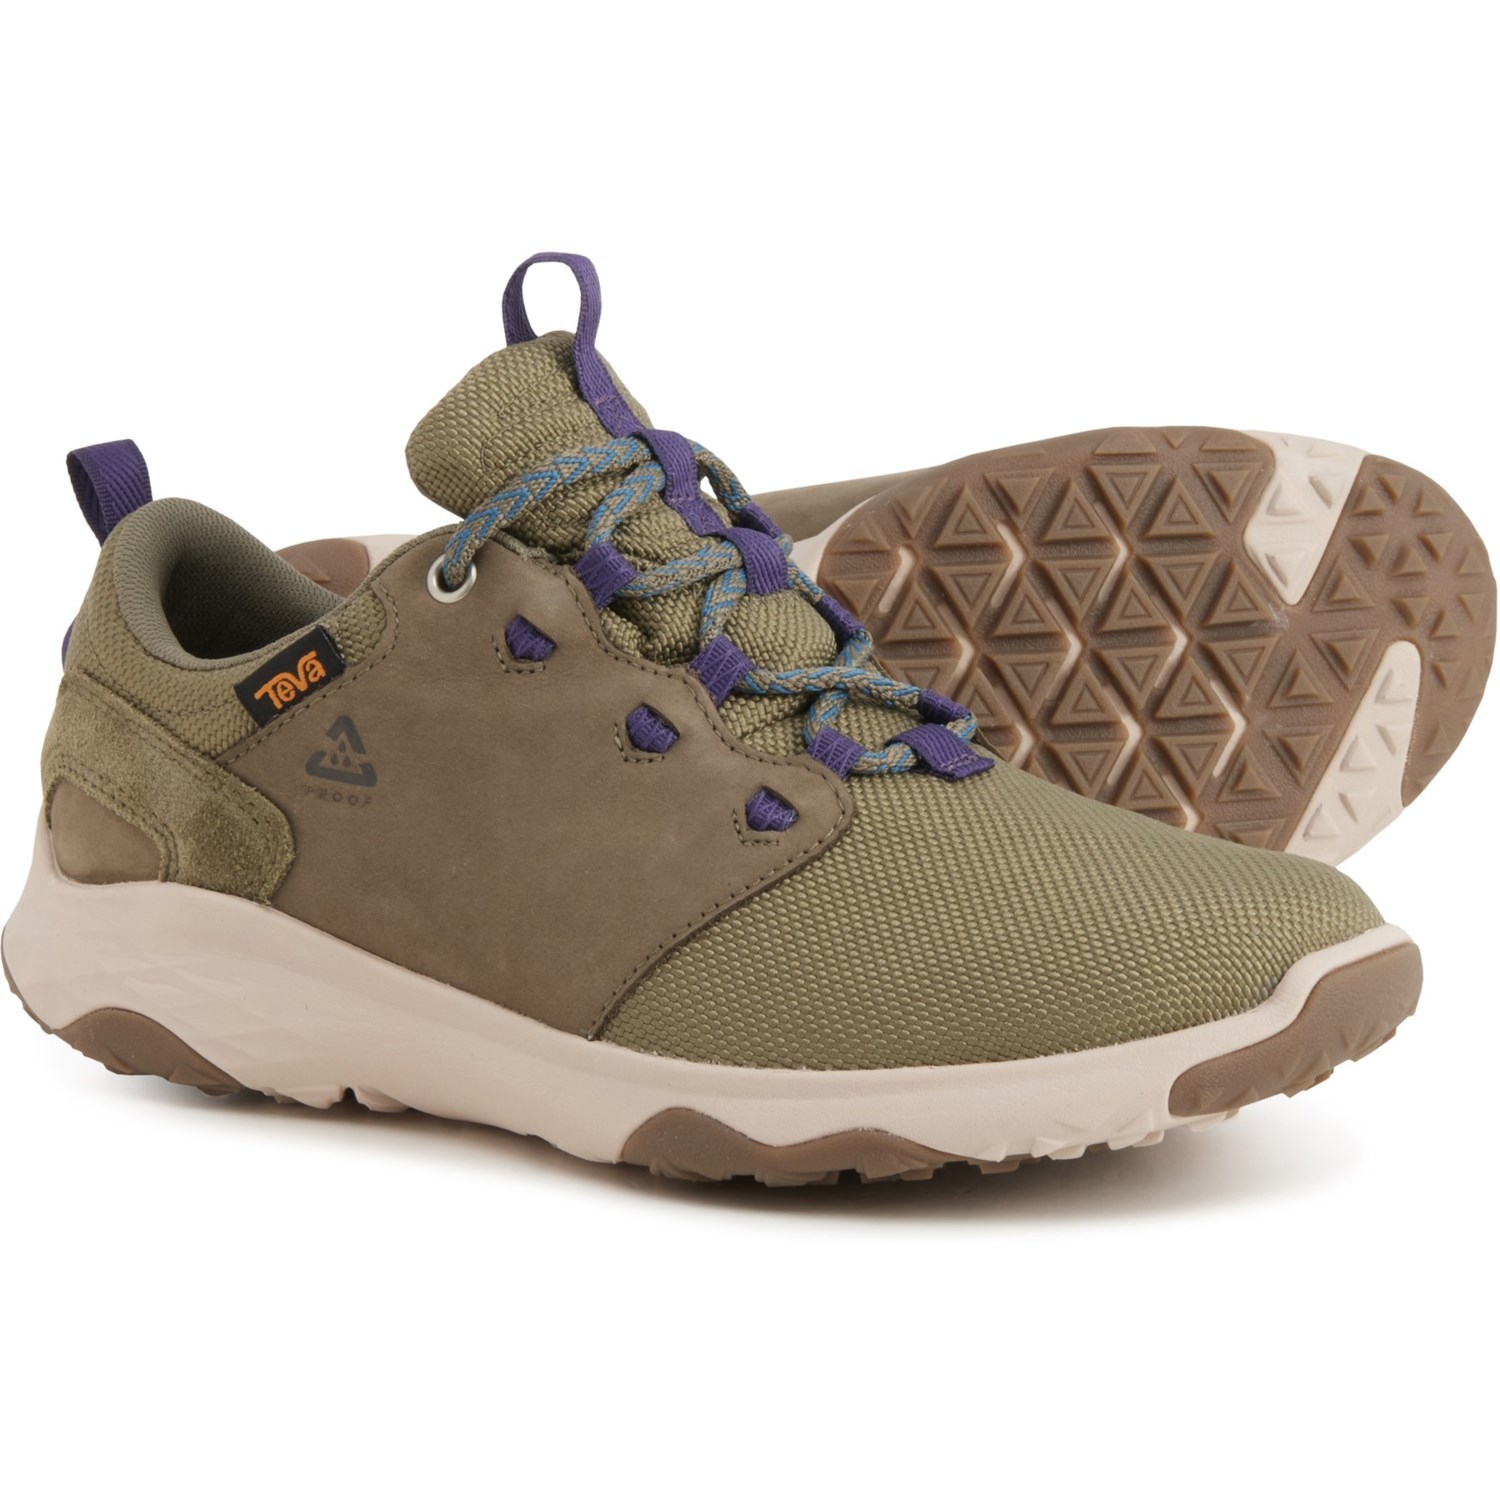 Teva Canyonview RP Hiking Shoes (For Women) - Save 58%